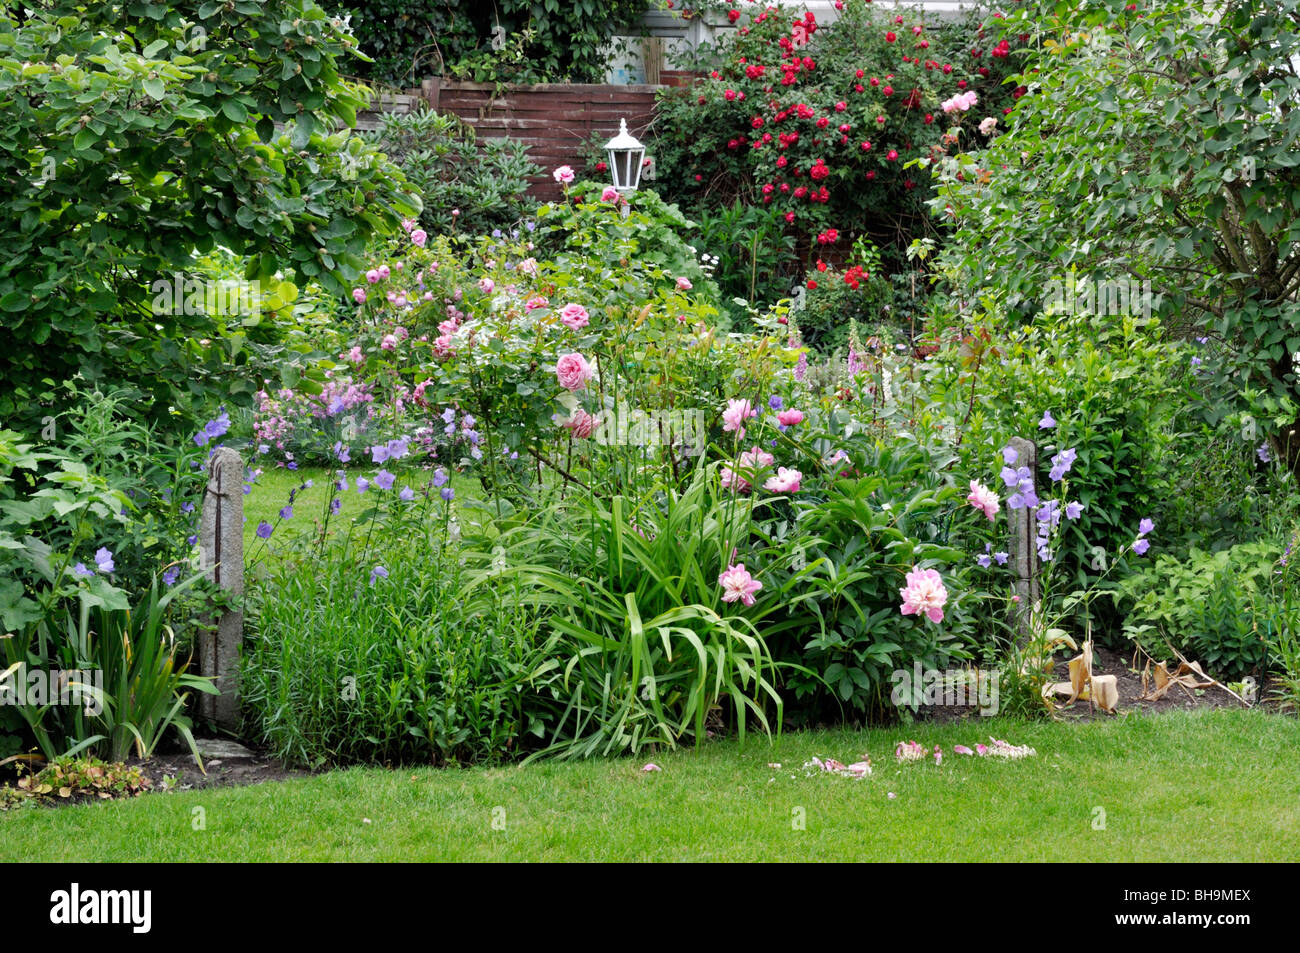 Perennial border with roses and peonies Stock Photo